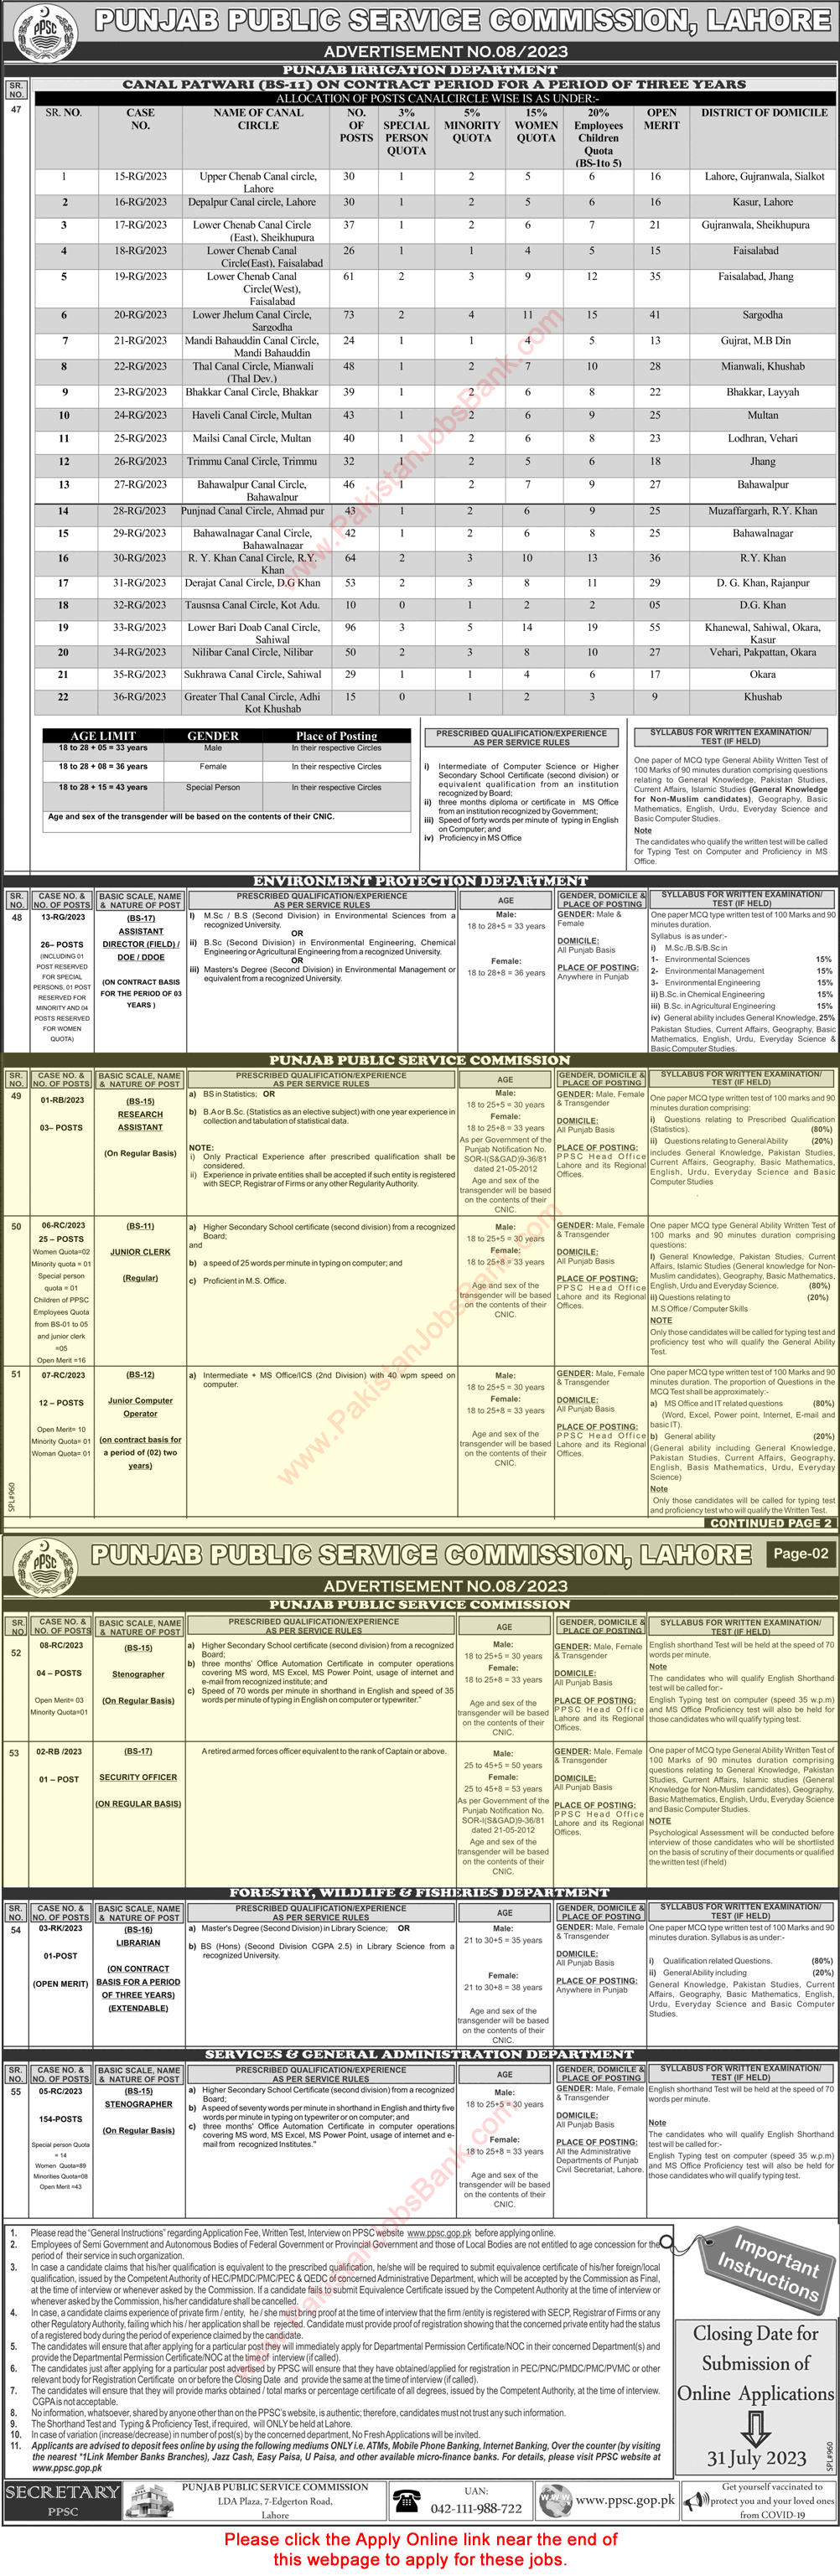 PPSC Jobs July 2023 Apply Online Clerks, Computer Operators & Others Punjab Public Service Commission Latest